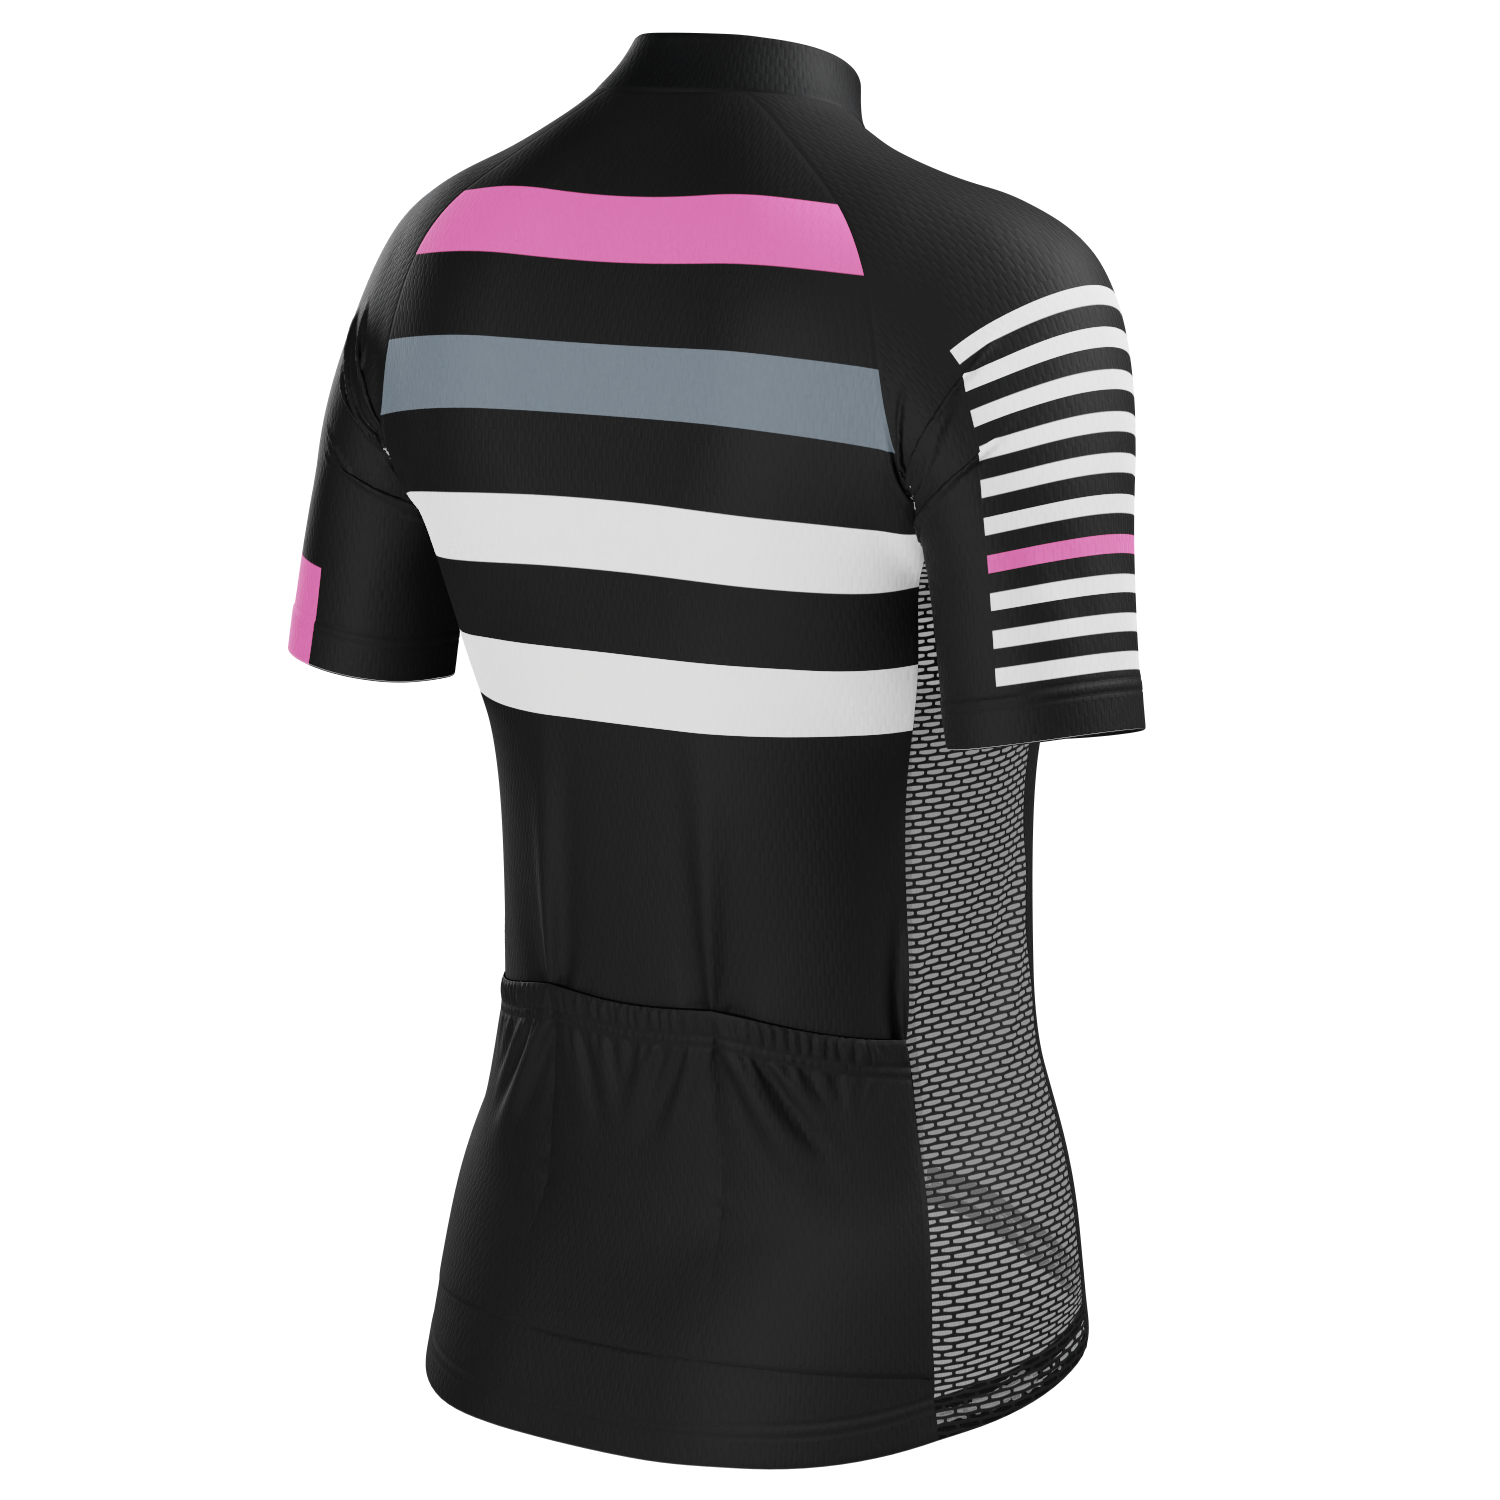 Women's Four Stripes with Pink Short Sleeve Cycling Jersey